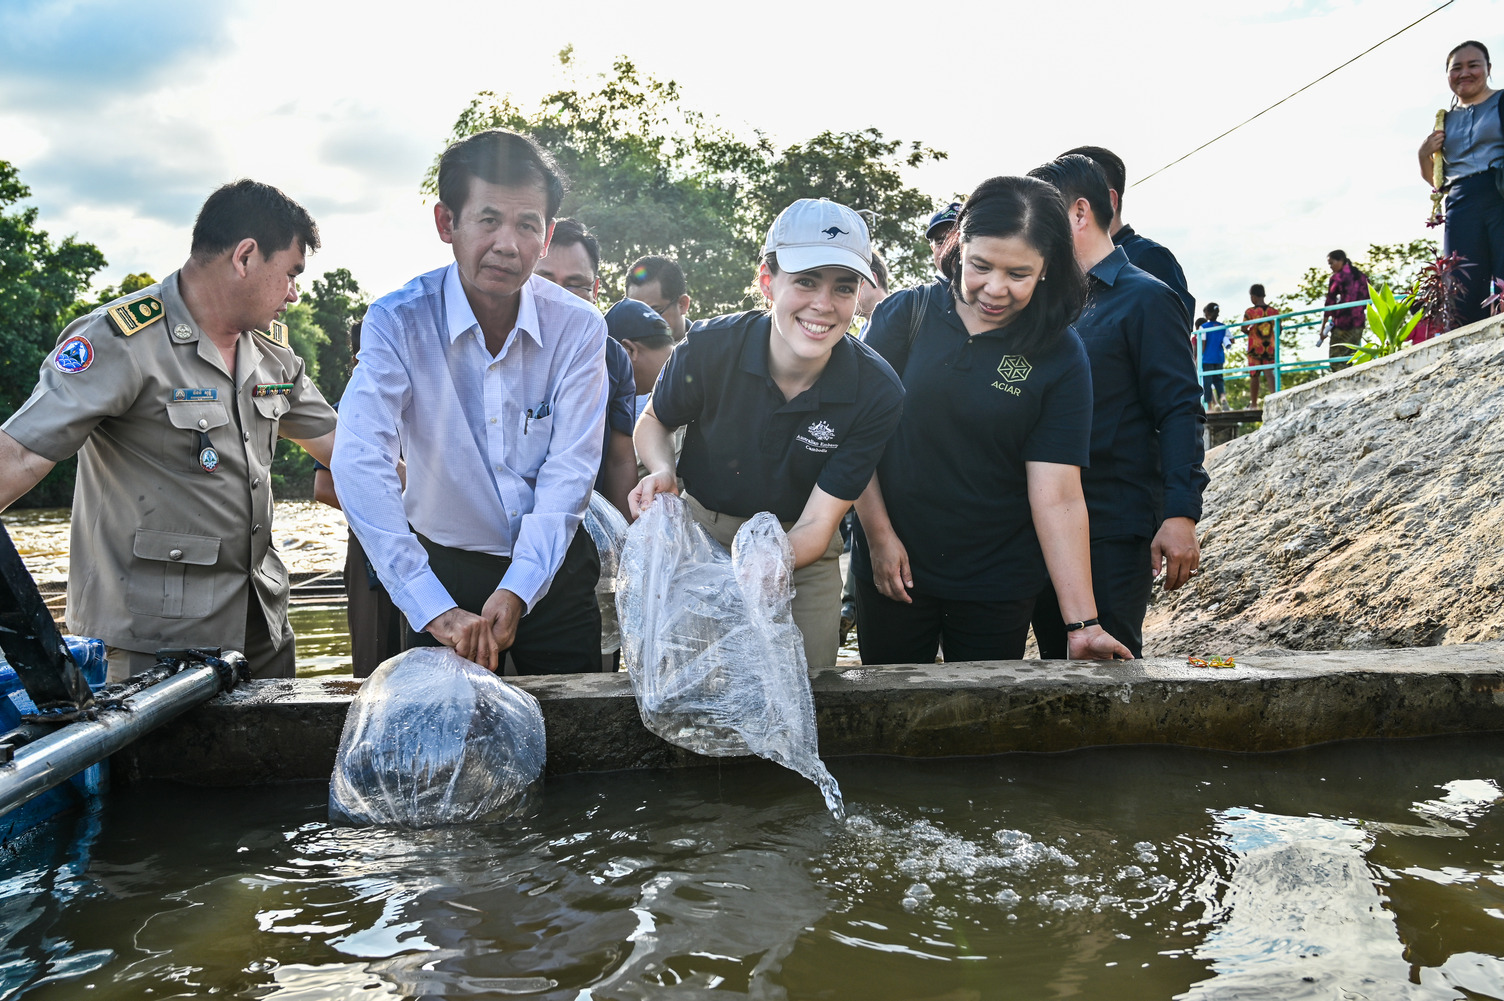 DFAT representative Ms Faith Considine joined ACIAR Regional Manager for East and Southeast Asia office, Ms Dulce Carandang, and Siem Reap deputy provincial governor in releasing small fishes into the Sleng Fishway, symbolising a hopeful future for the fish population.